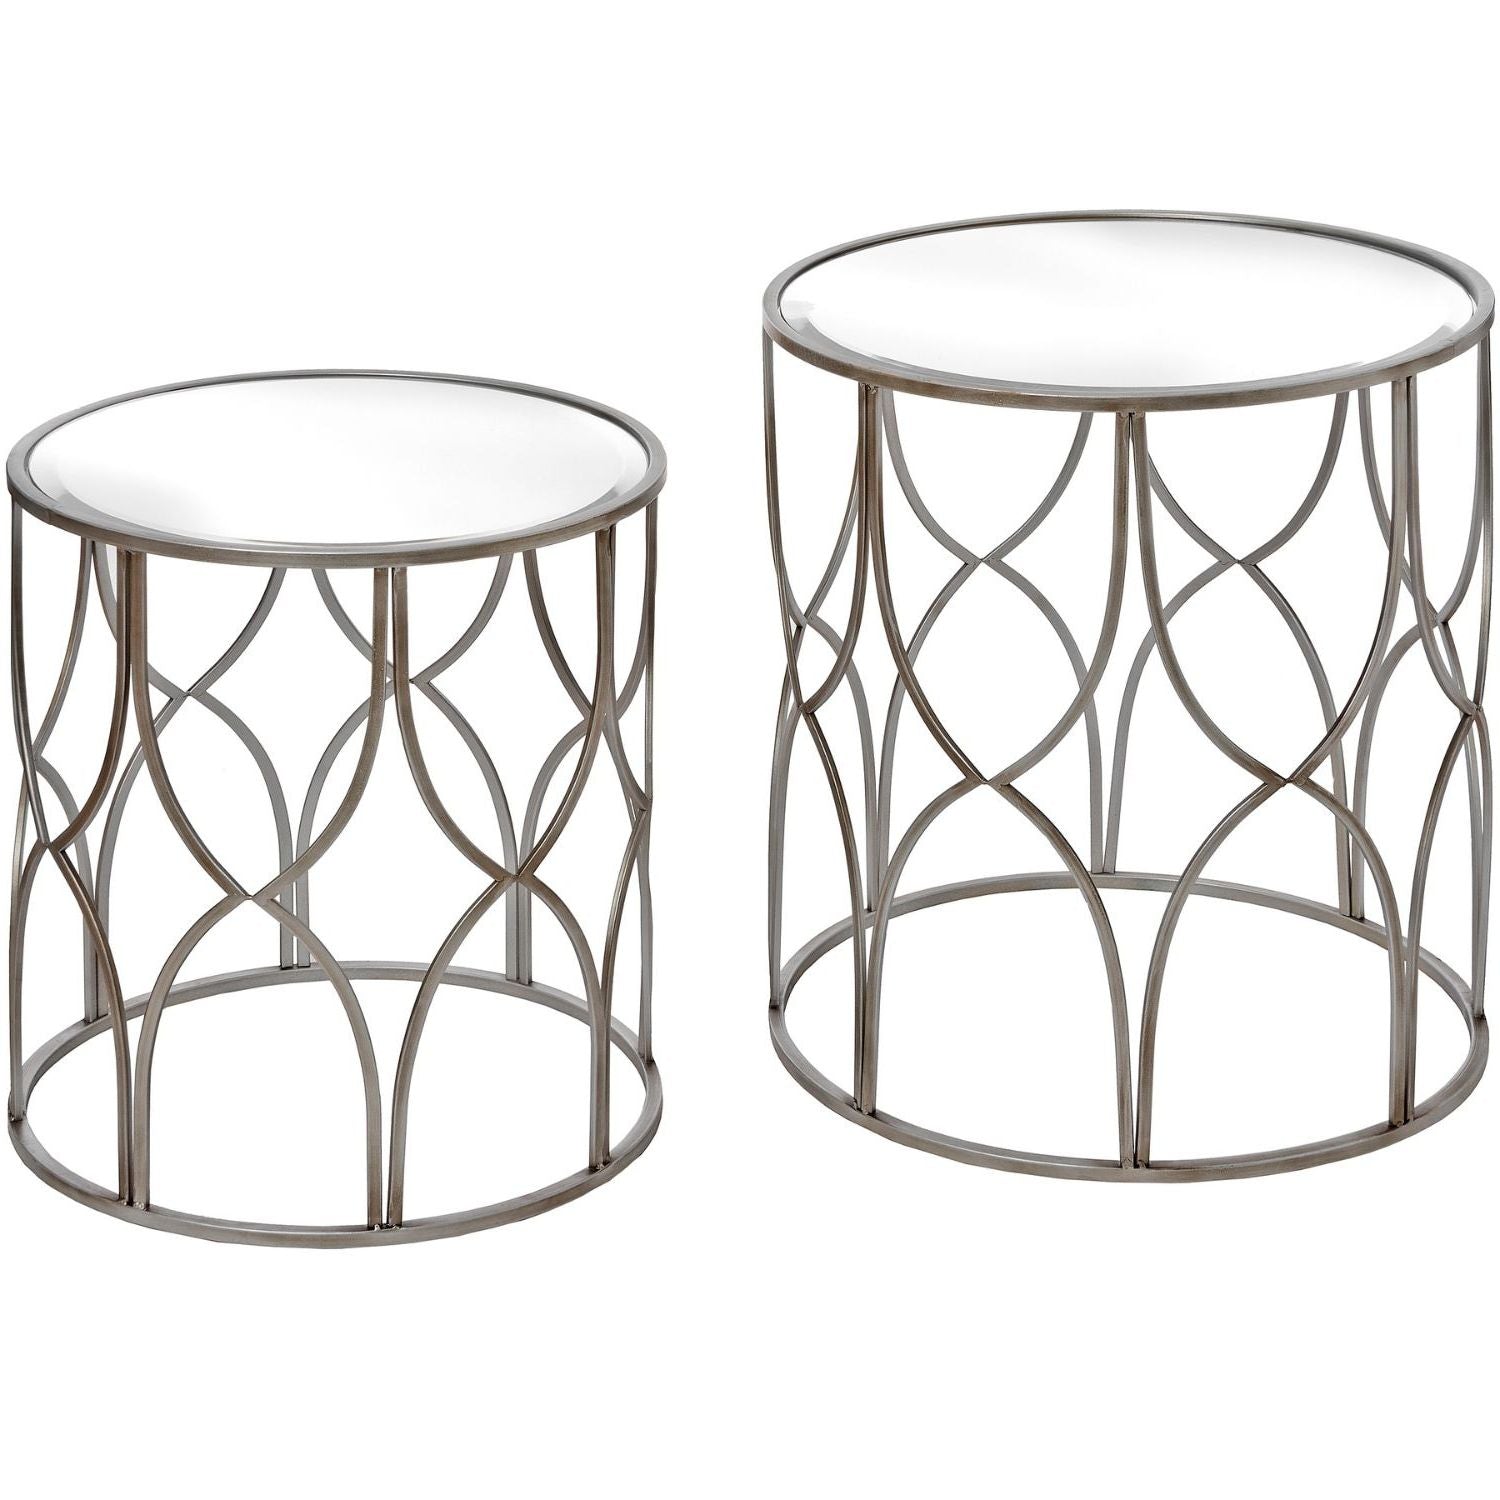 Two silver side tables with lattice design